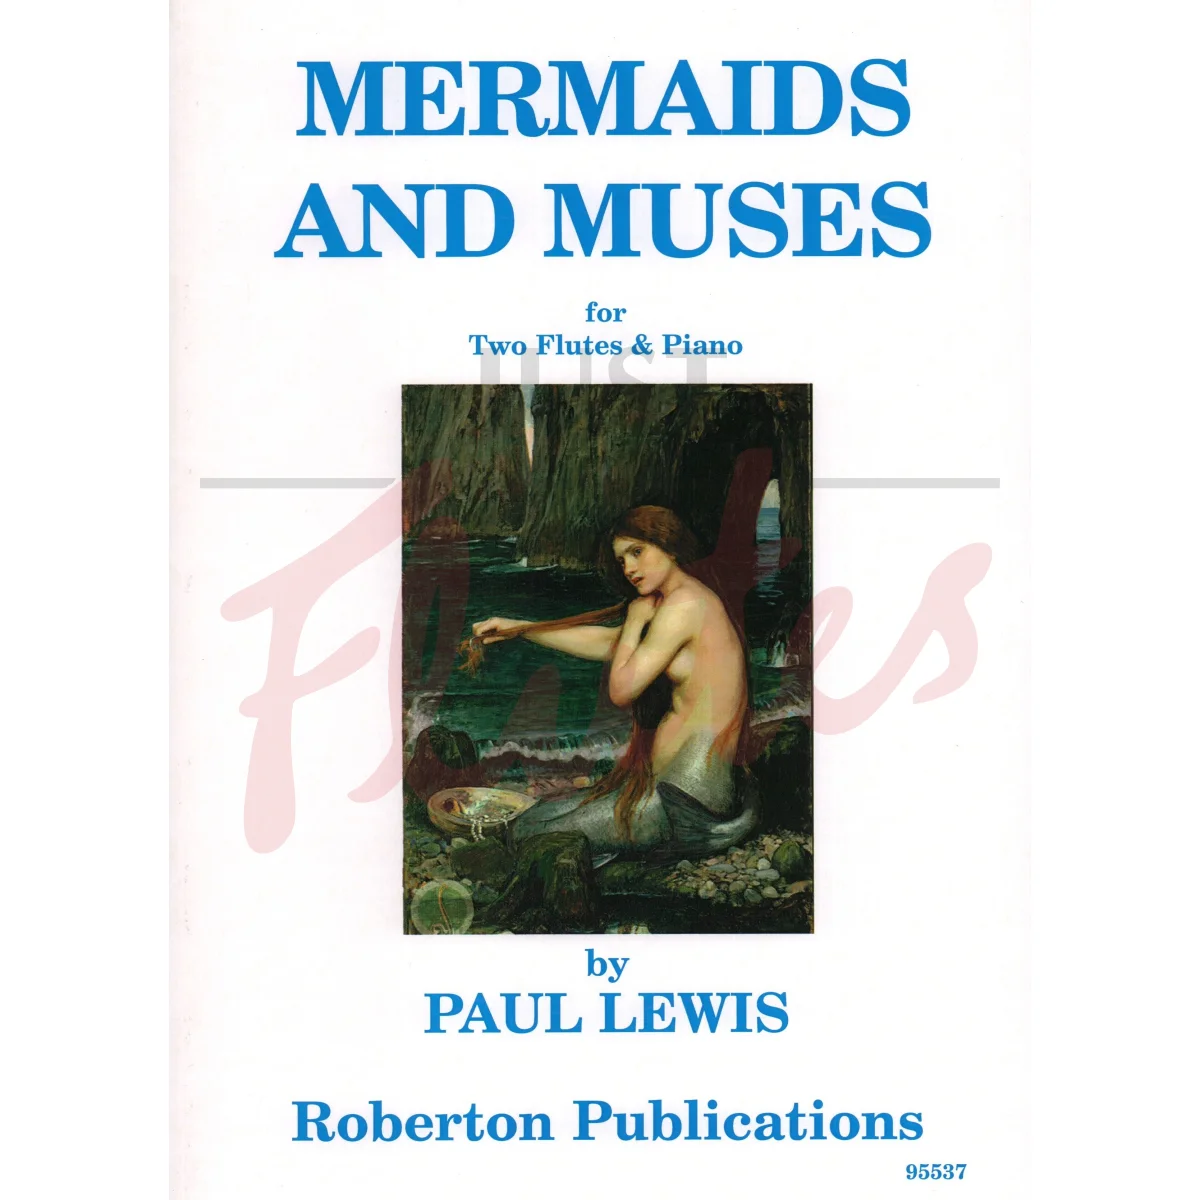 Mermaids and Muses for Two Flutes and Piano